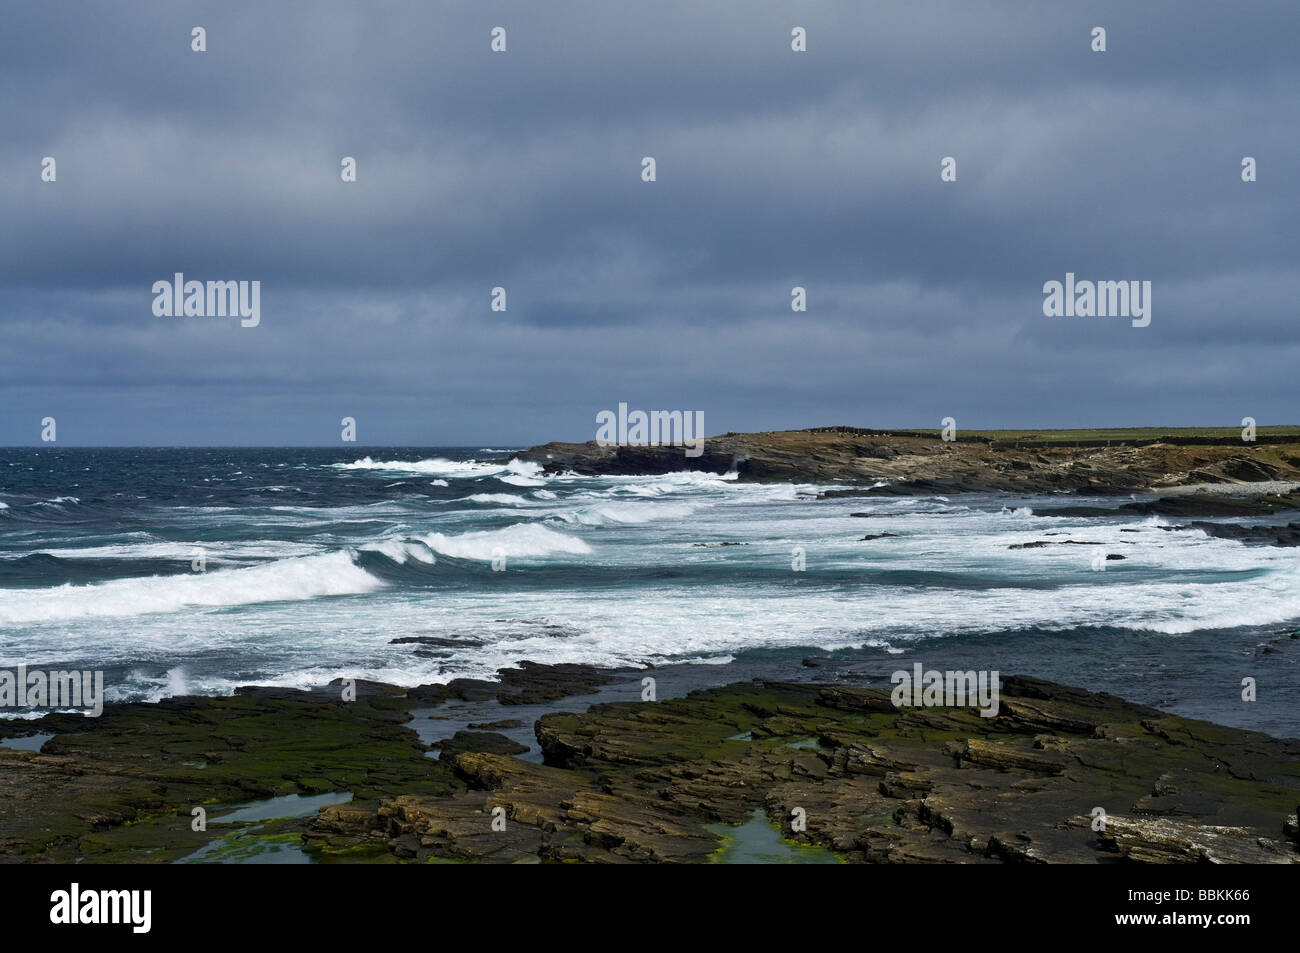 dh Bay of Ryasgeo NORTH RONALDSAY ORKNEY The Staff headland stormy weather white waves and rocky coastline Stock Photo